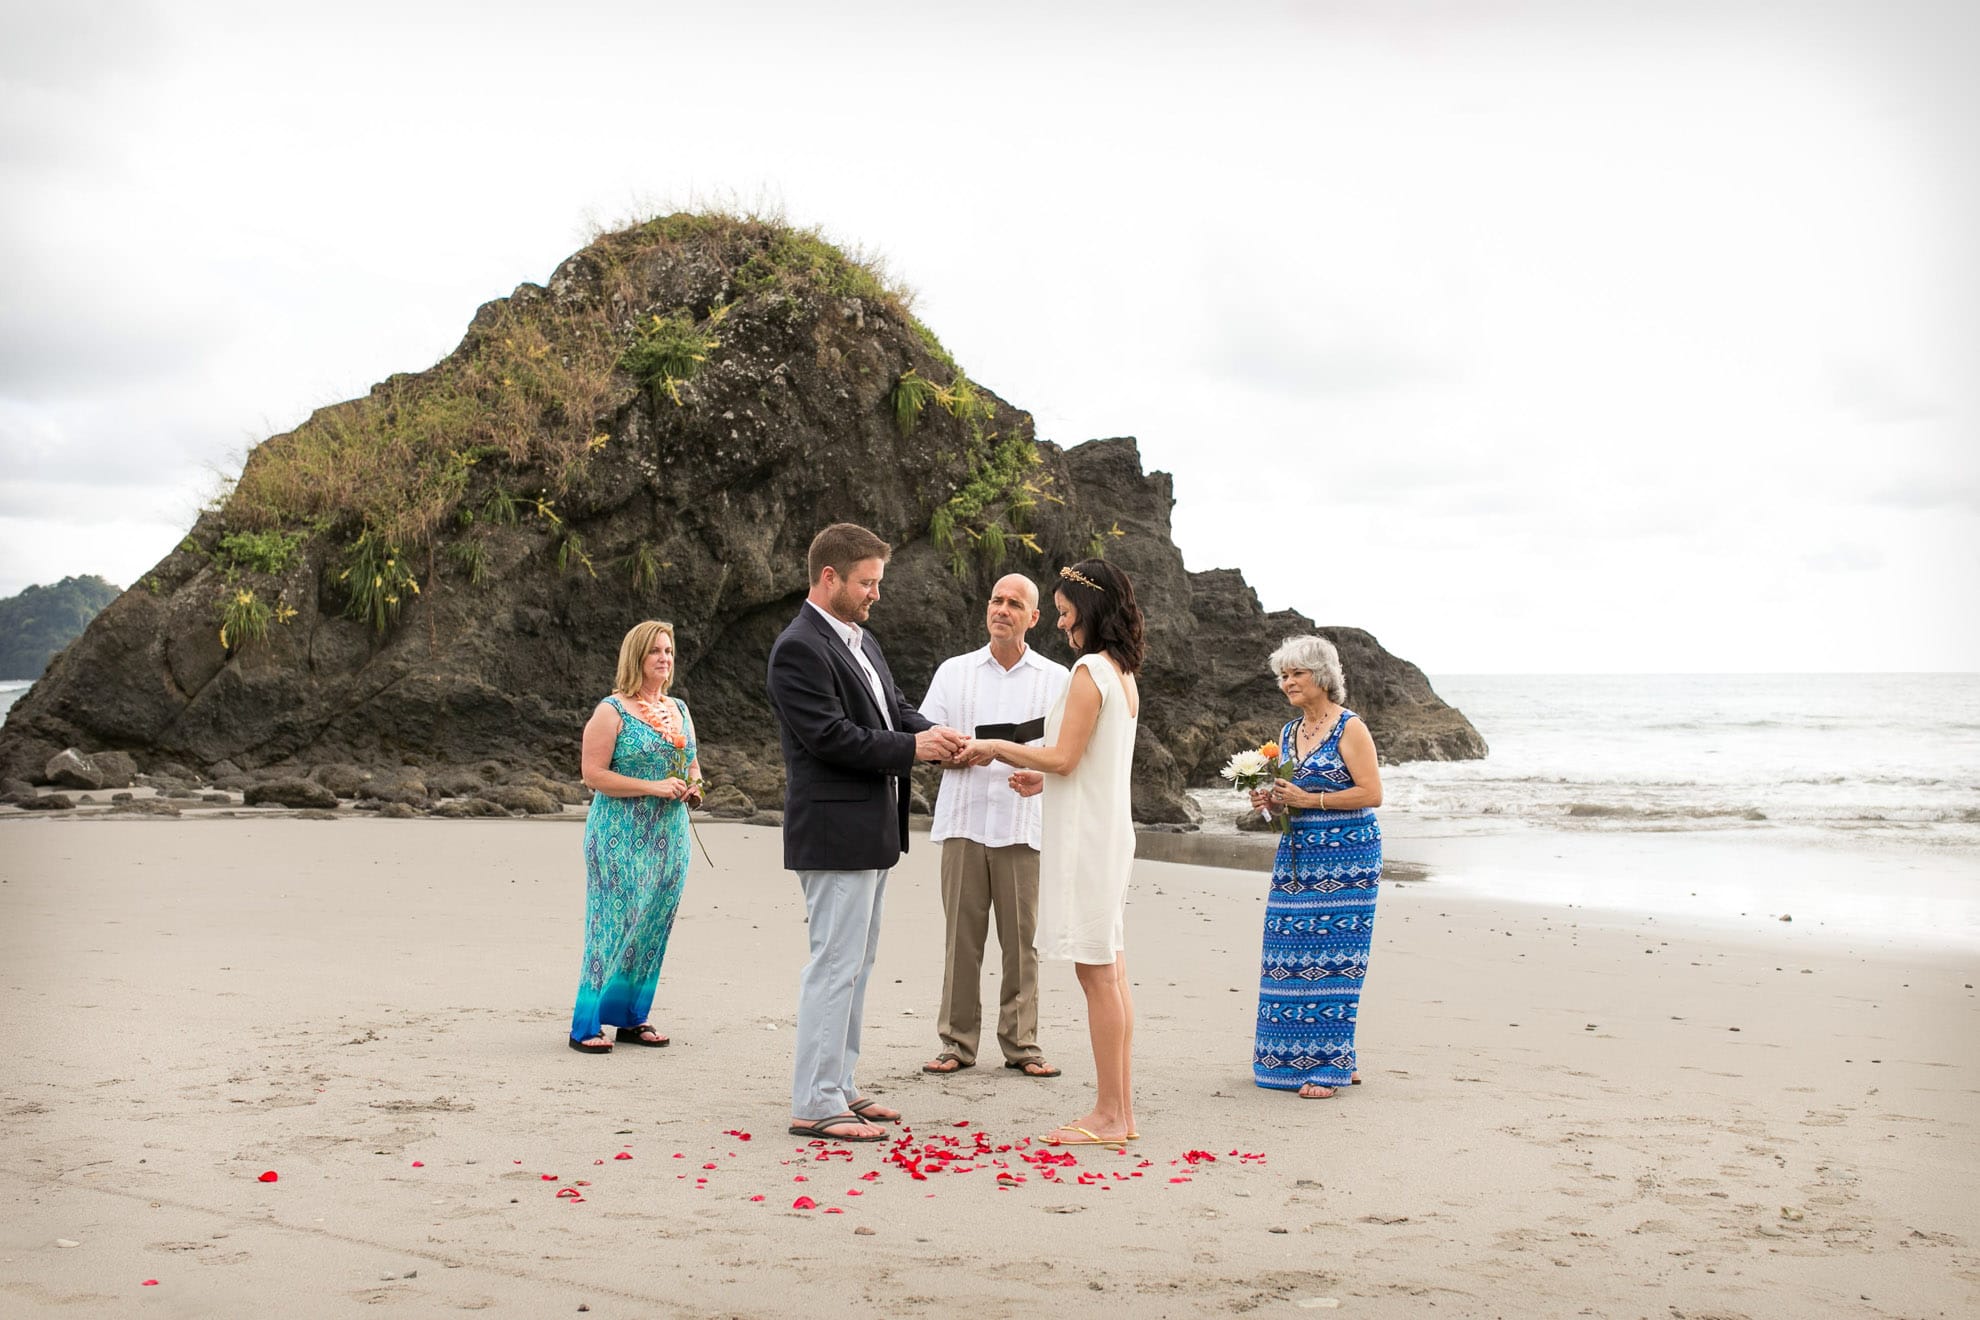 Just the moms came to this intimate wedding in Costa Rica